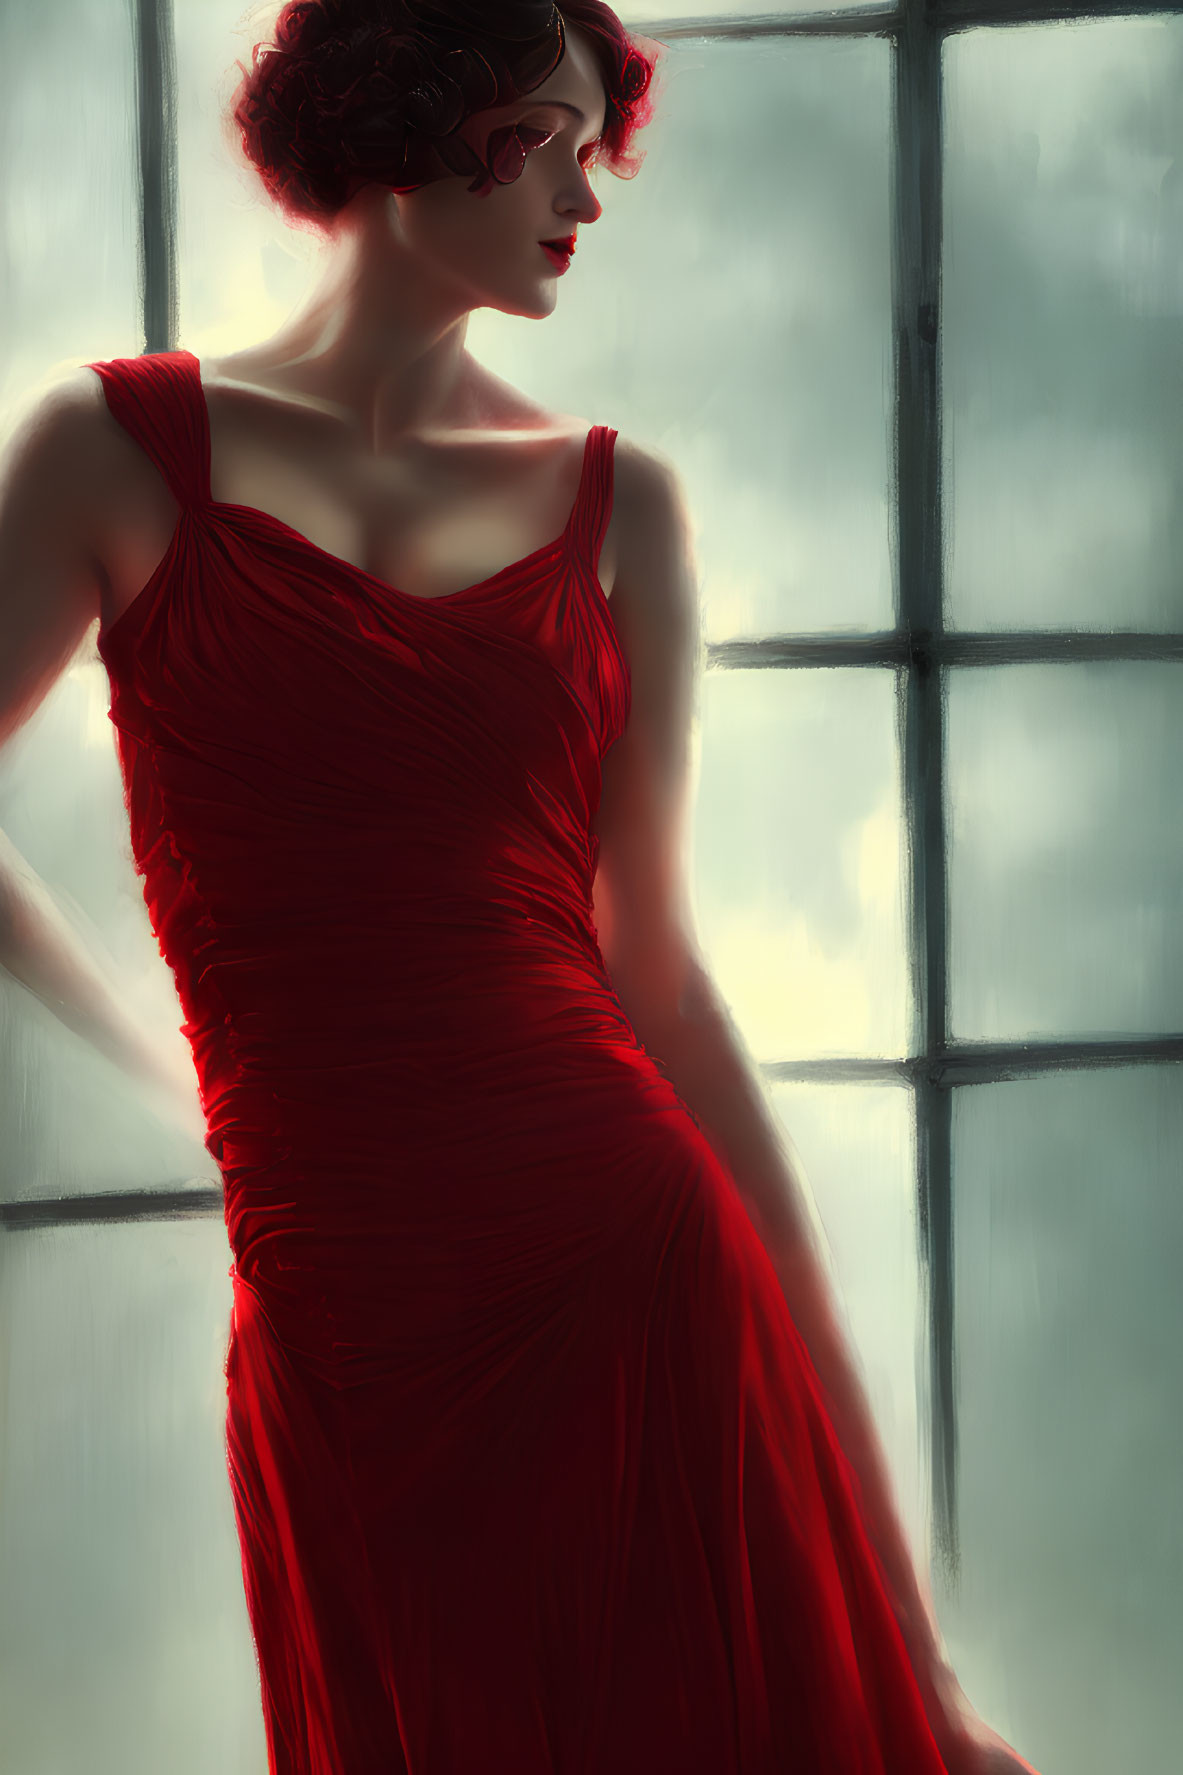 Woman in Red Dress Contemplating by Window with Soft Shadows